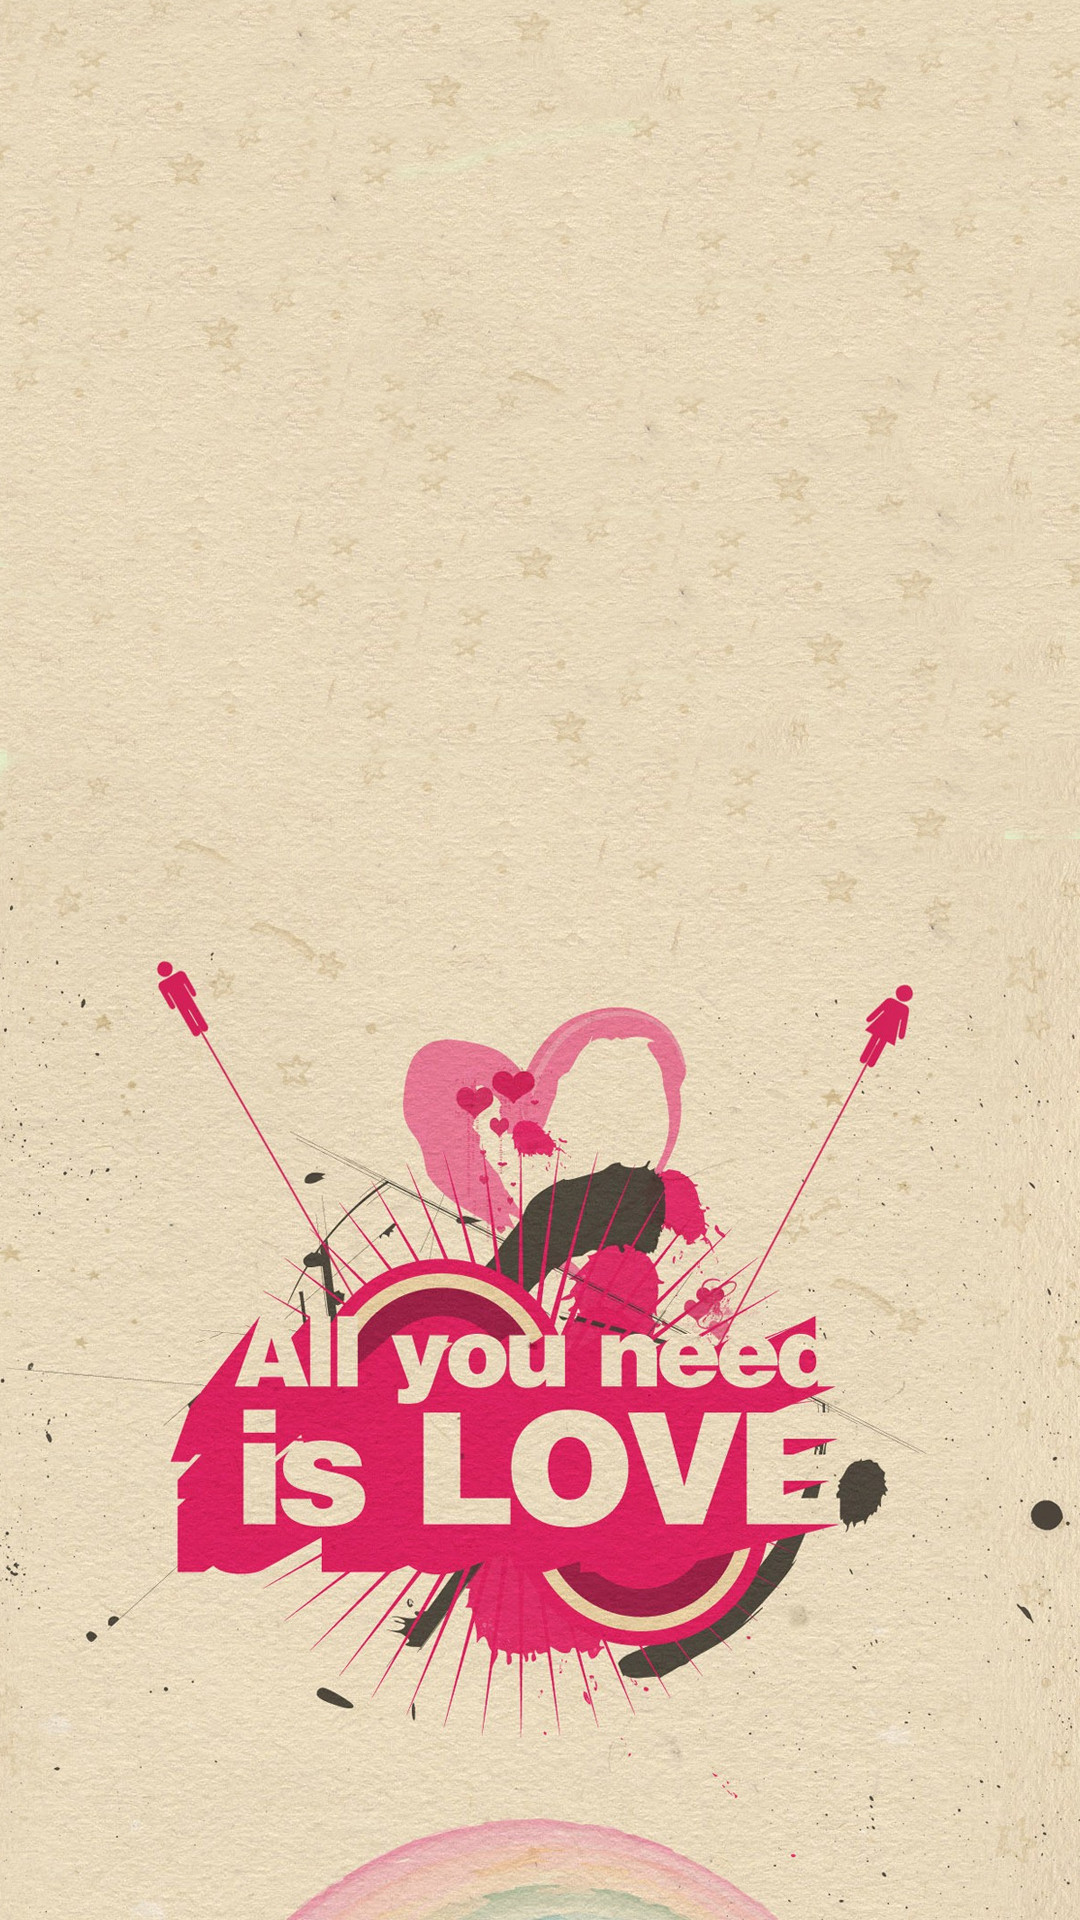 All you need is LOVE | iPhone Wallpaper